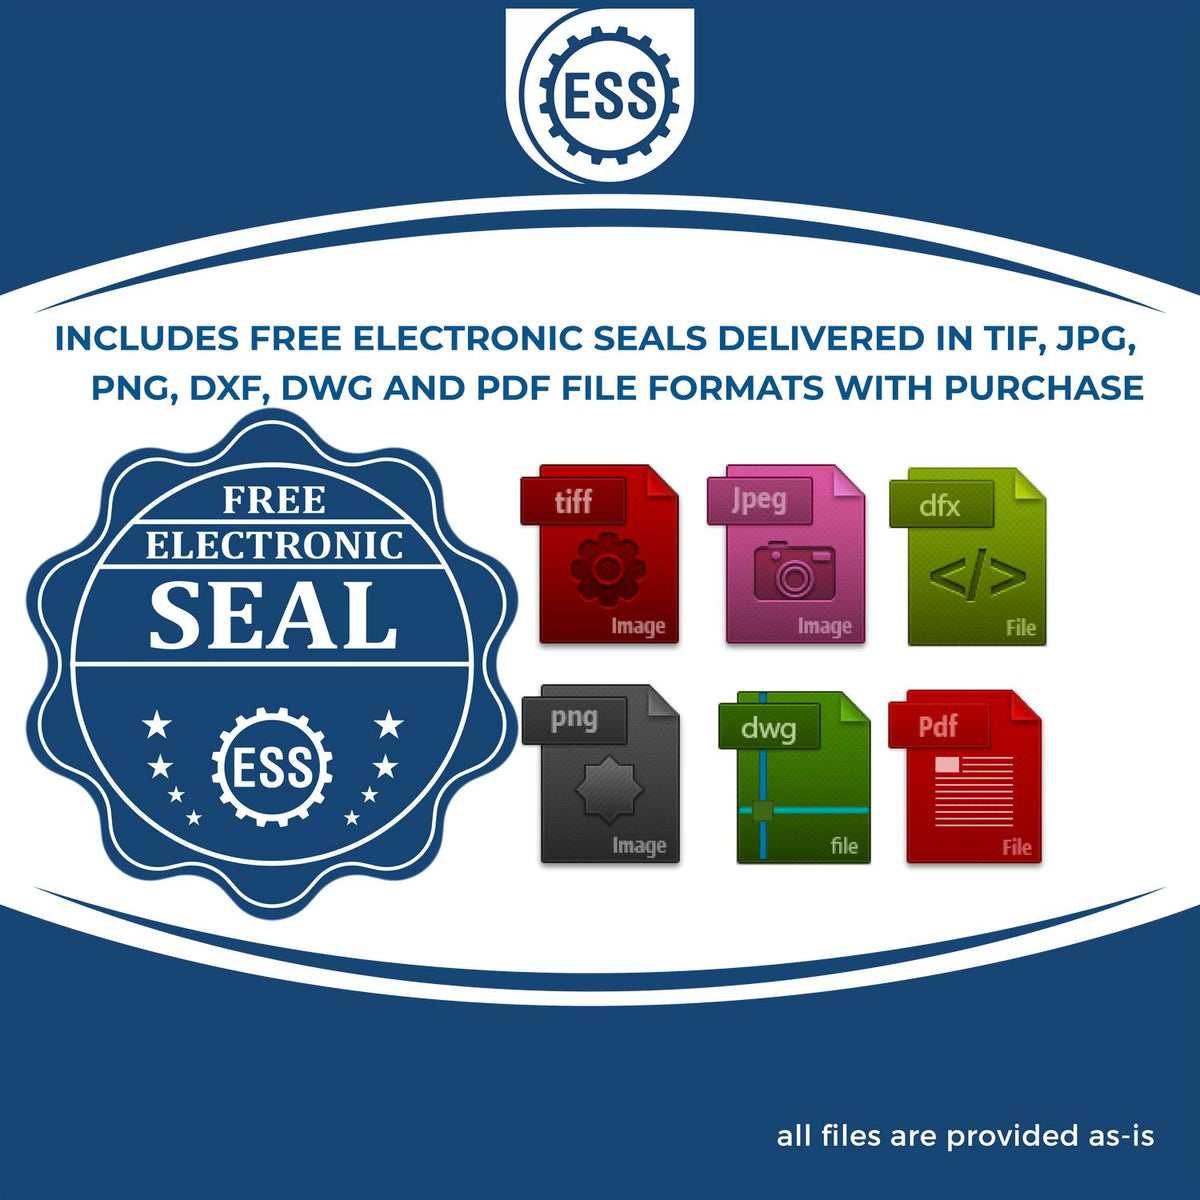 An infographic for the free electronic seal for the Heavy-Duty Missouri Rectangular Notary Stamp illustrating the different file type icons such as DXF, DWG, TIF, JPG and PNG.